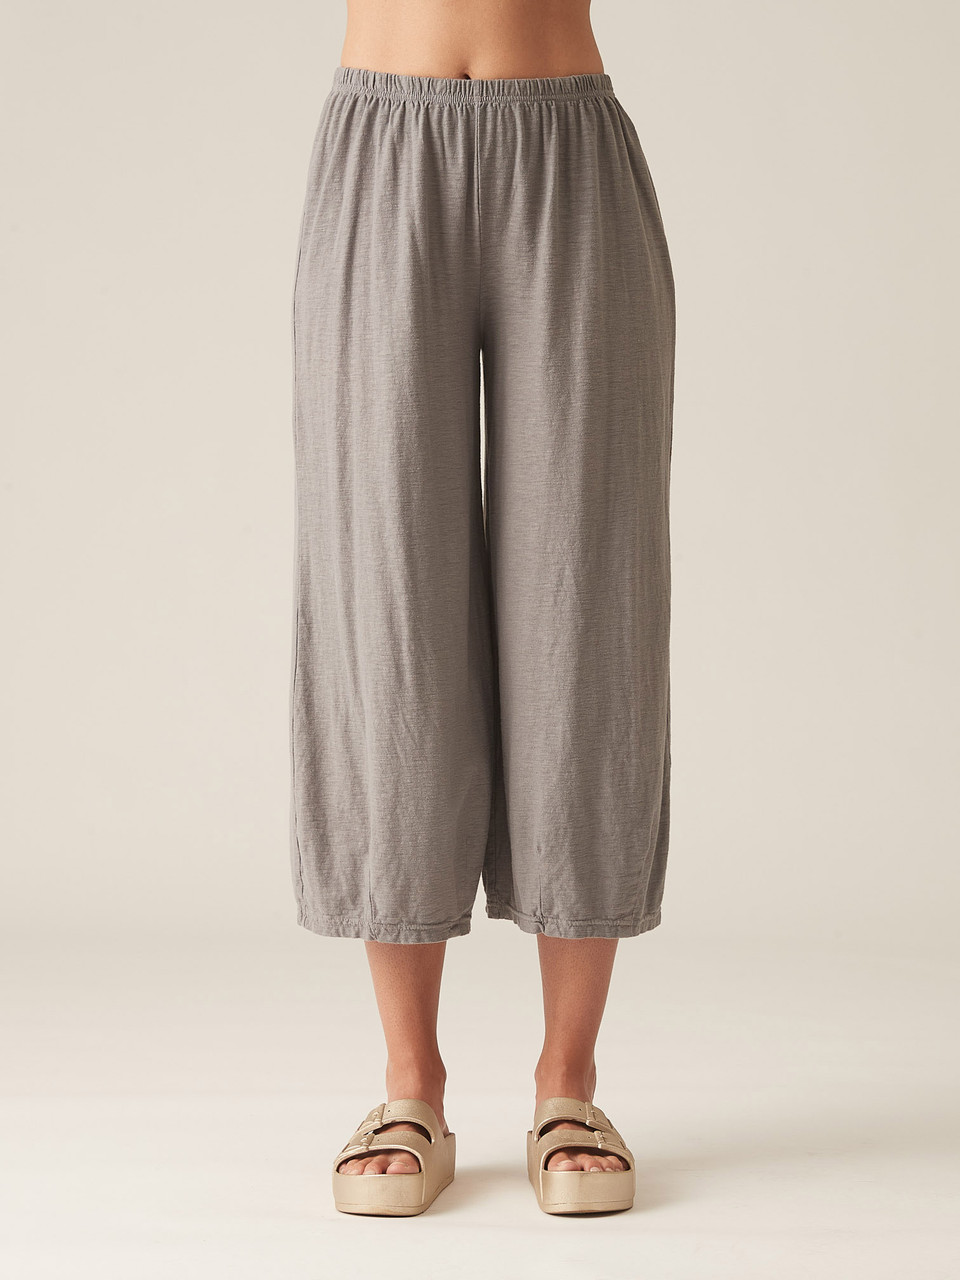 Cut Loose Linen Cotton Jersey Crop Pant with Darts - New Moon Boutique